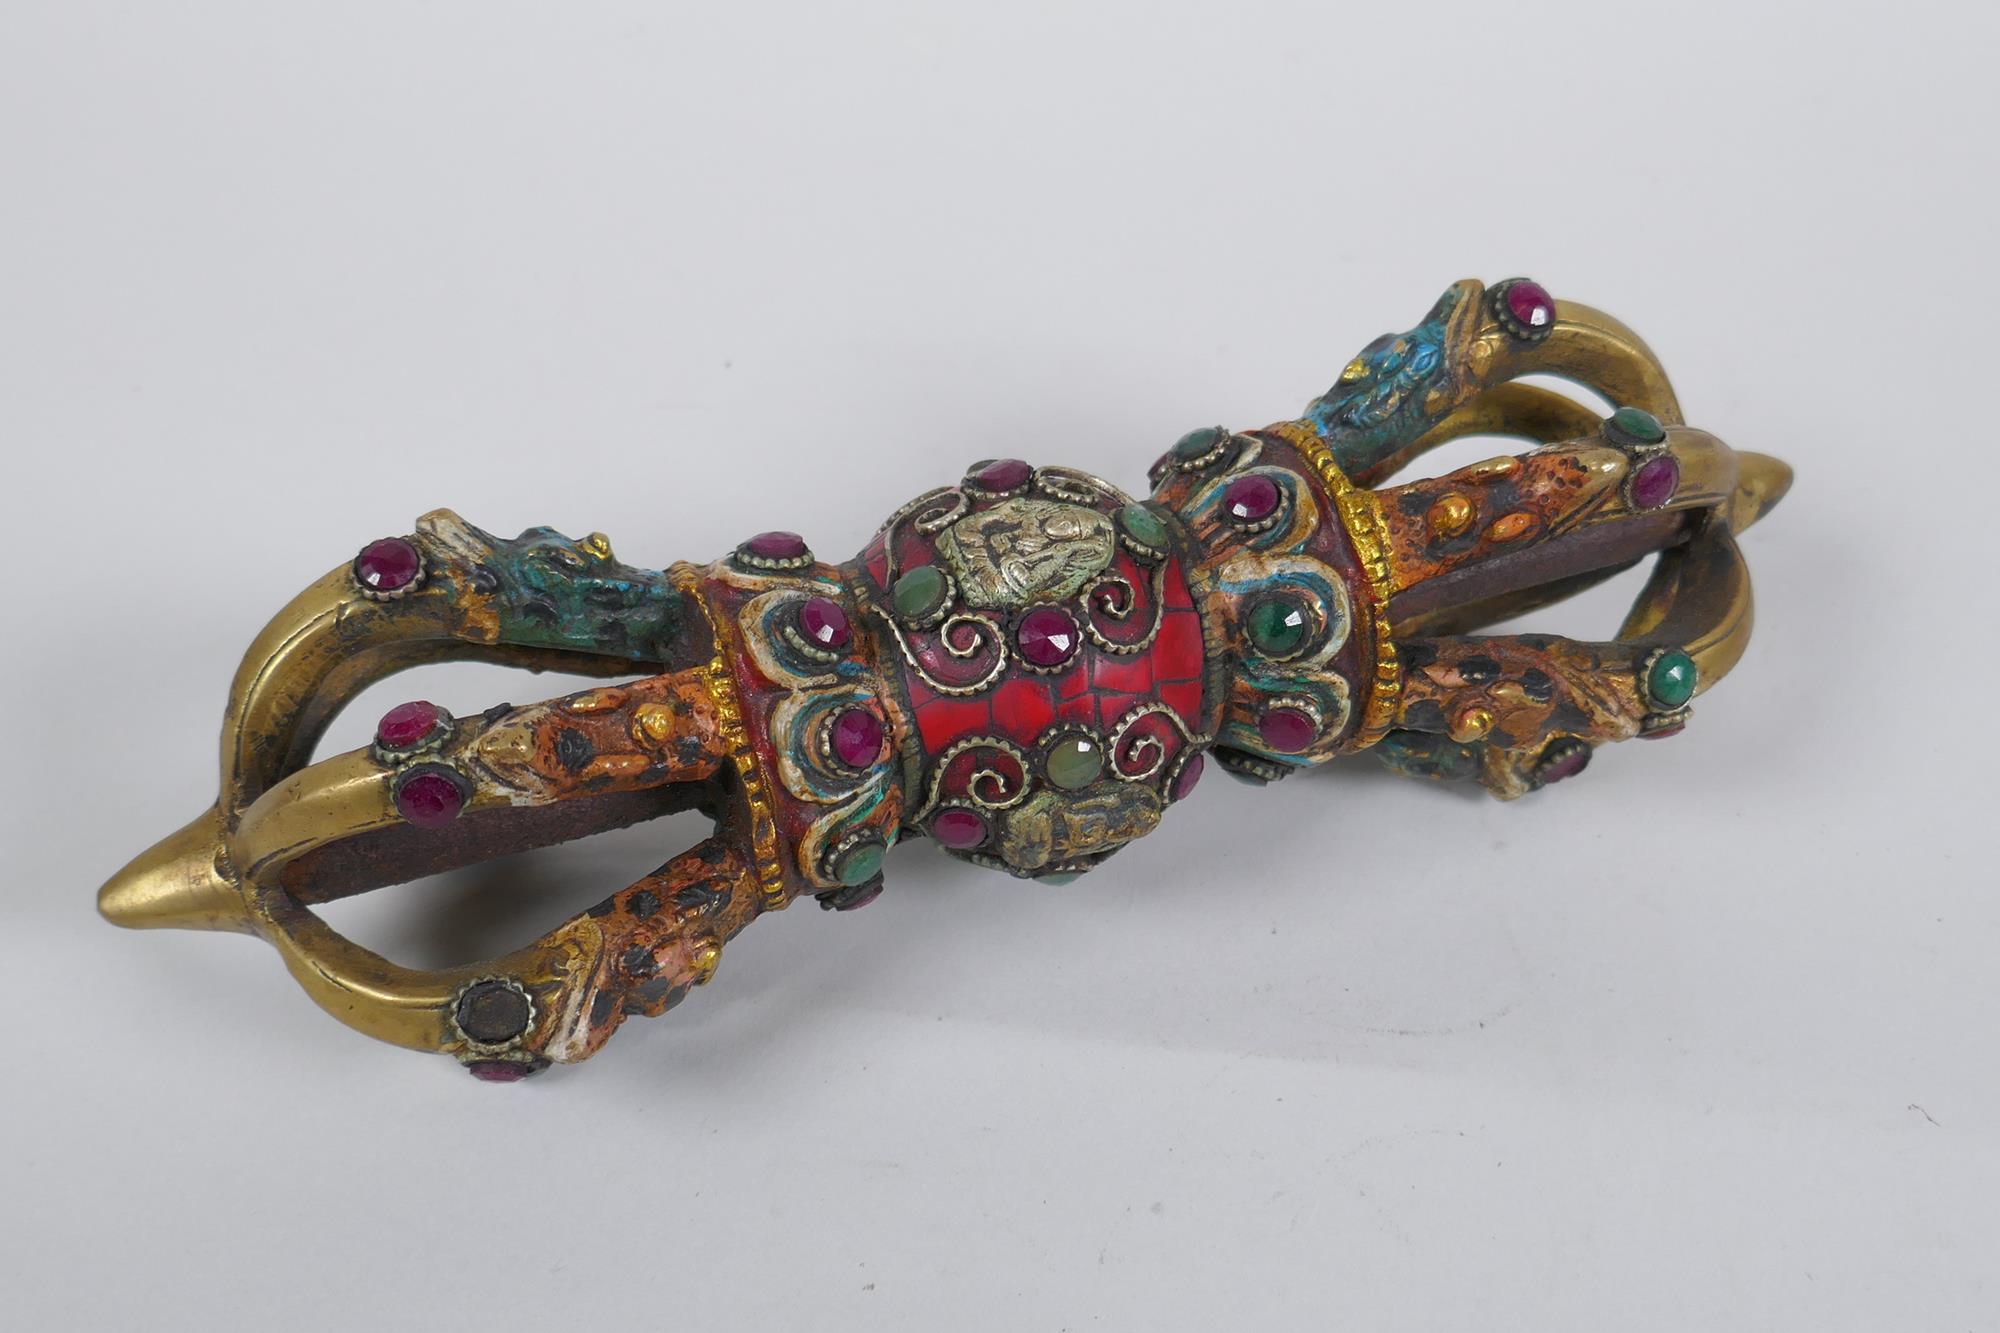 A Tibetan ceremonial bronze vajra with painted details and stone settings, 23cm long - Image 2 of 3